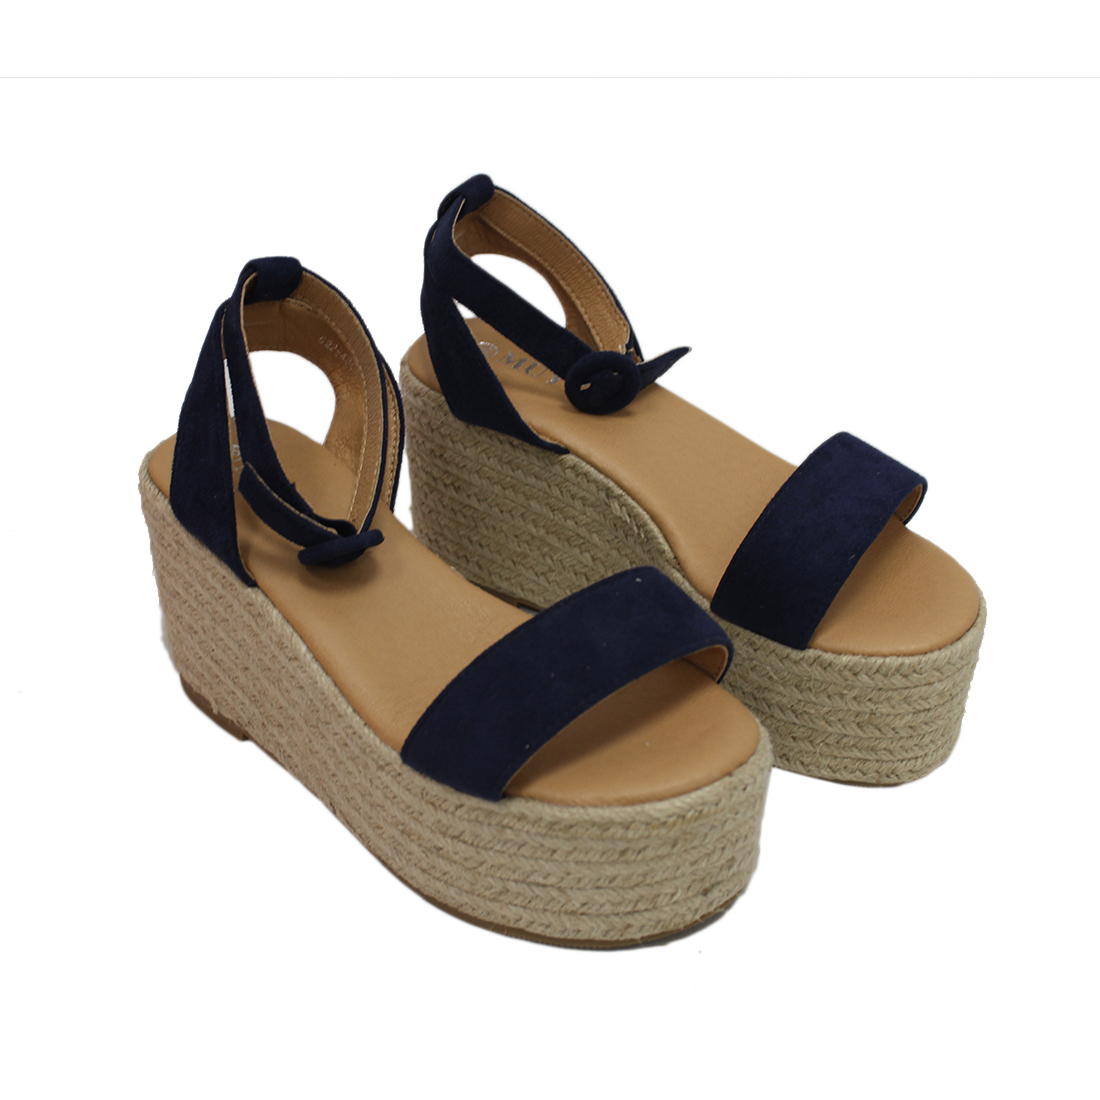 * High wedge with plain strap infront- sued material